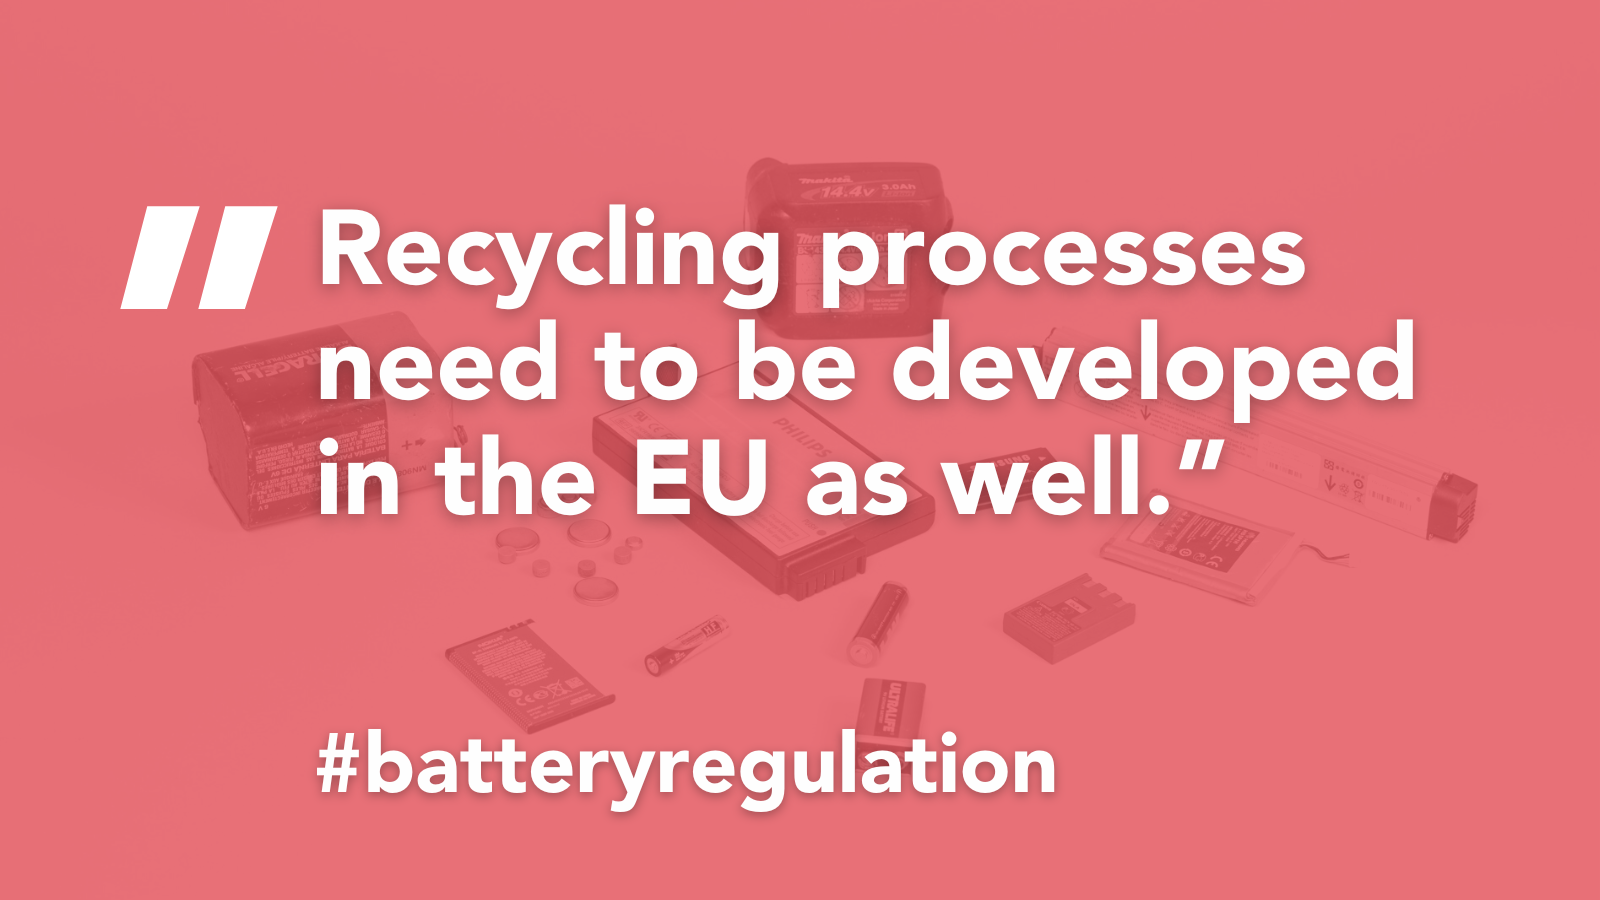 #BatteryRegulation: There is demand for recycling the rare metals used in lithium-ion accumulators, but some accumulators lack recycling solutions—what will happen to the increasingly demanding recycling targets of the EU?  